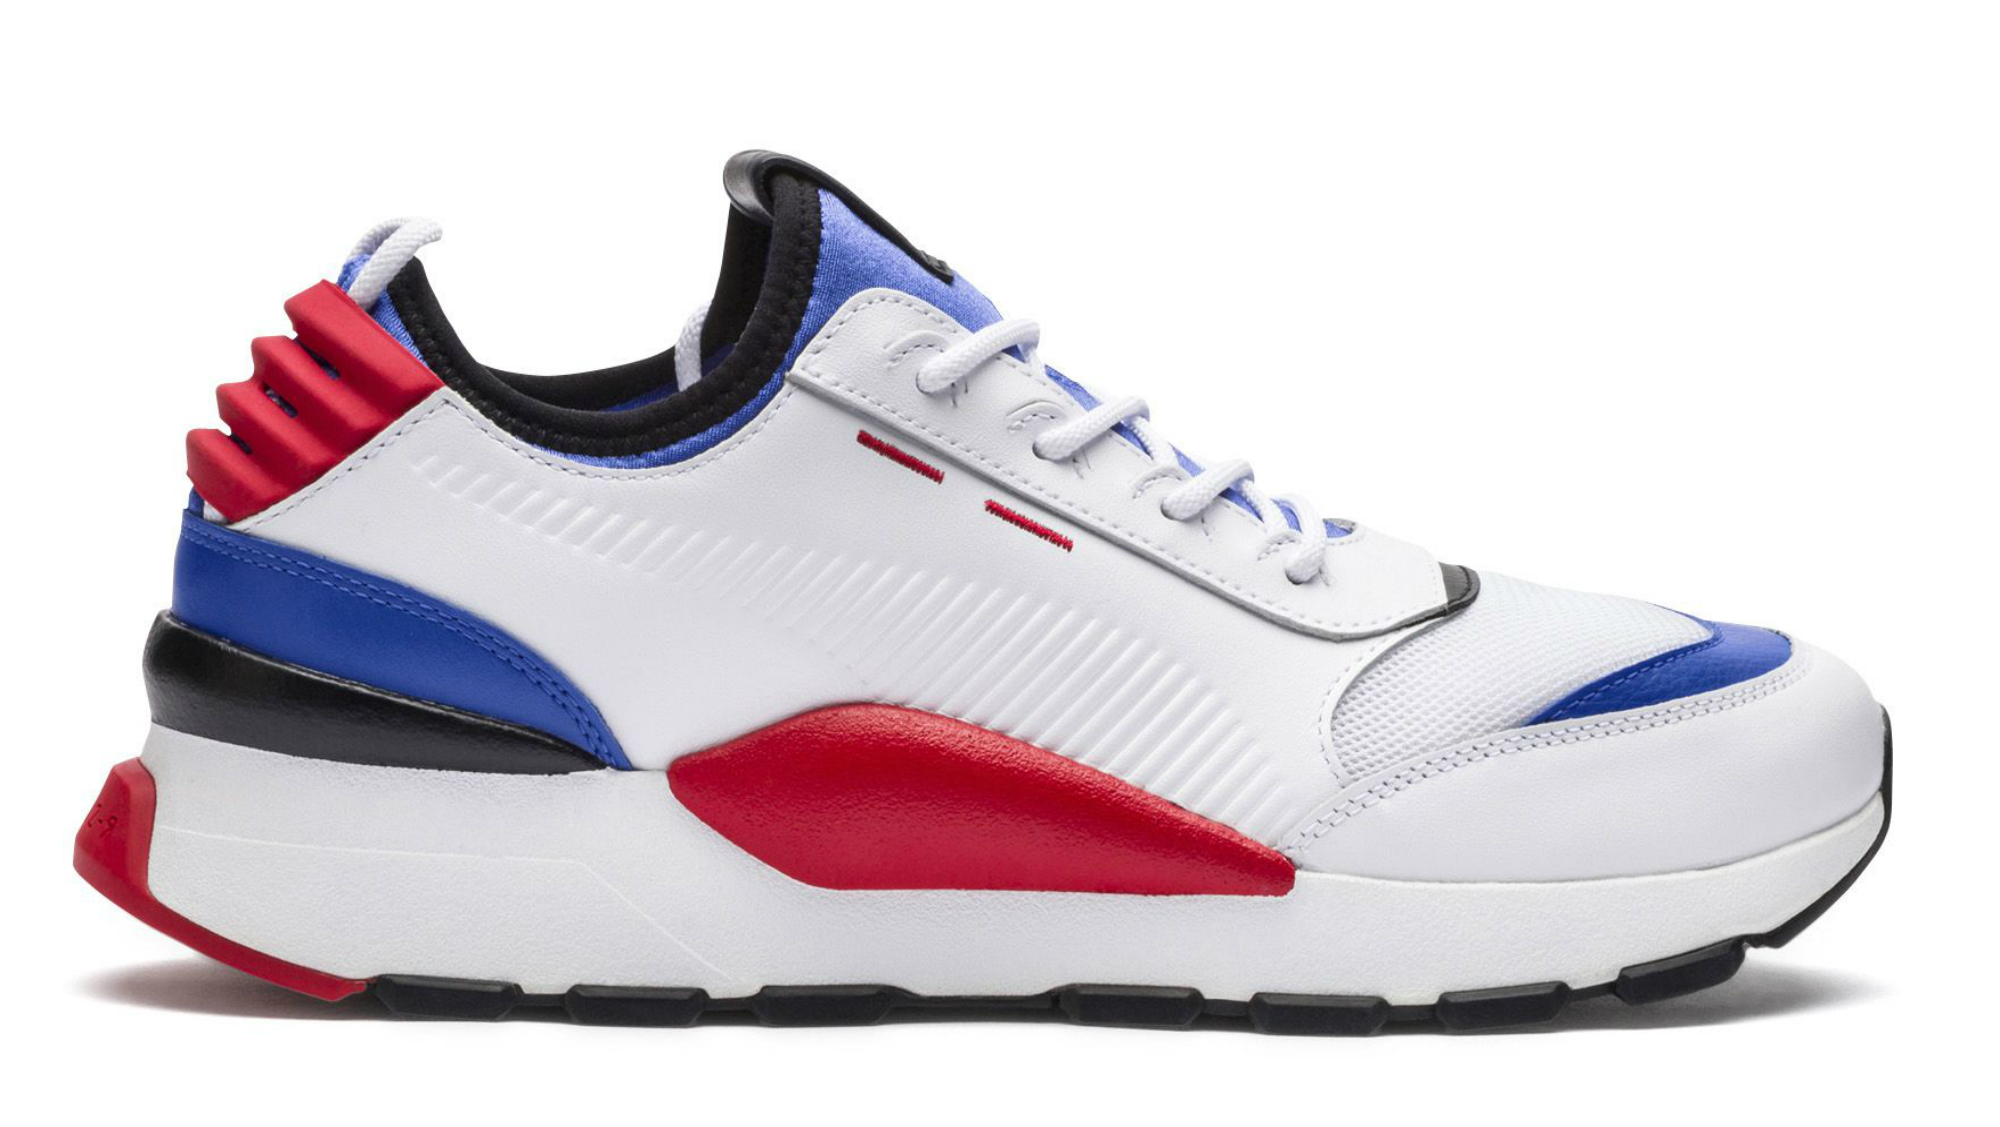 puma rs 0 sound red white blue 366890 01 release date